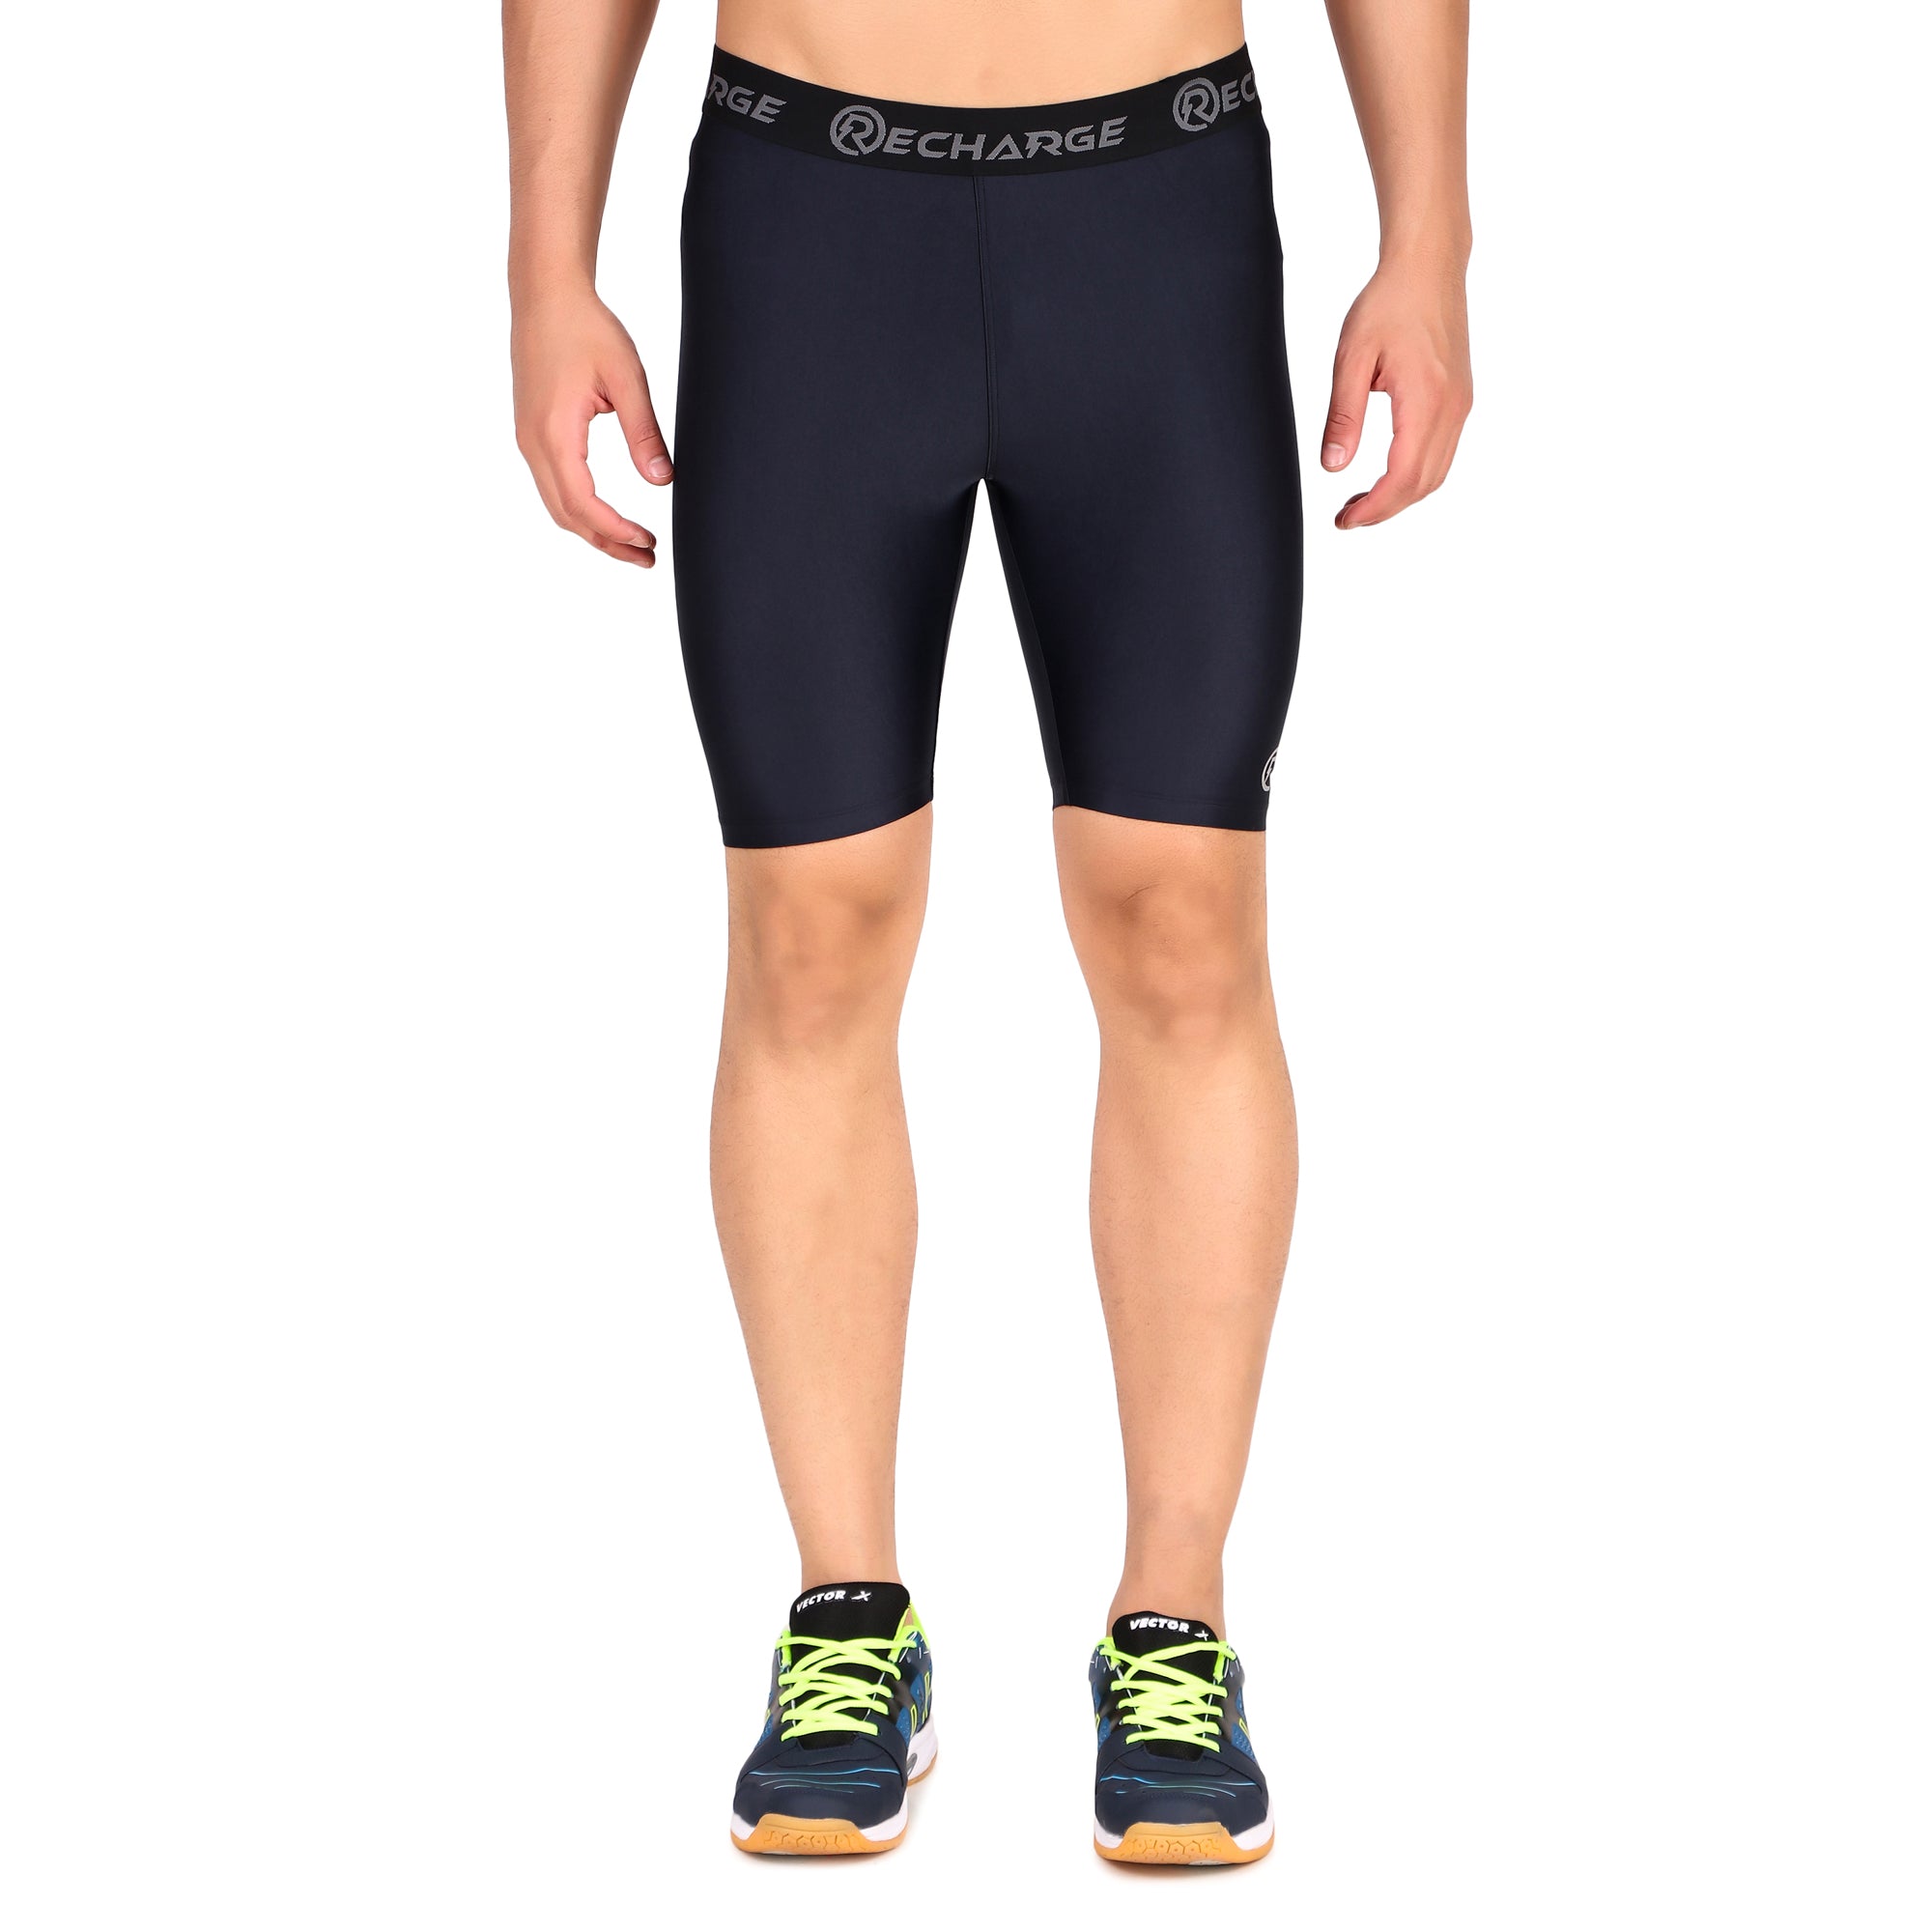 Recharge Polyester Compression Shorts (Navy)